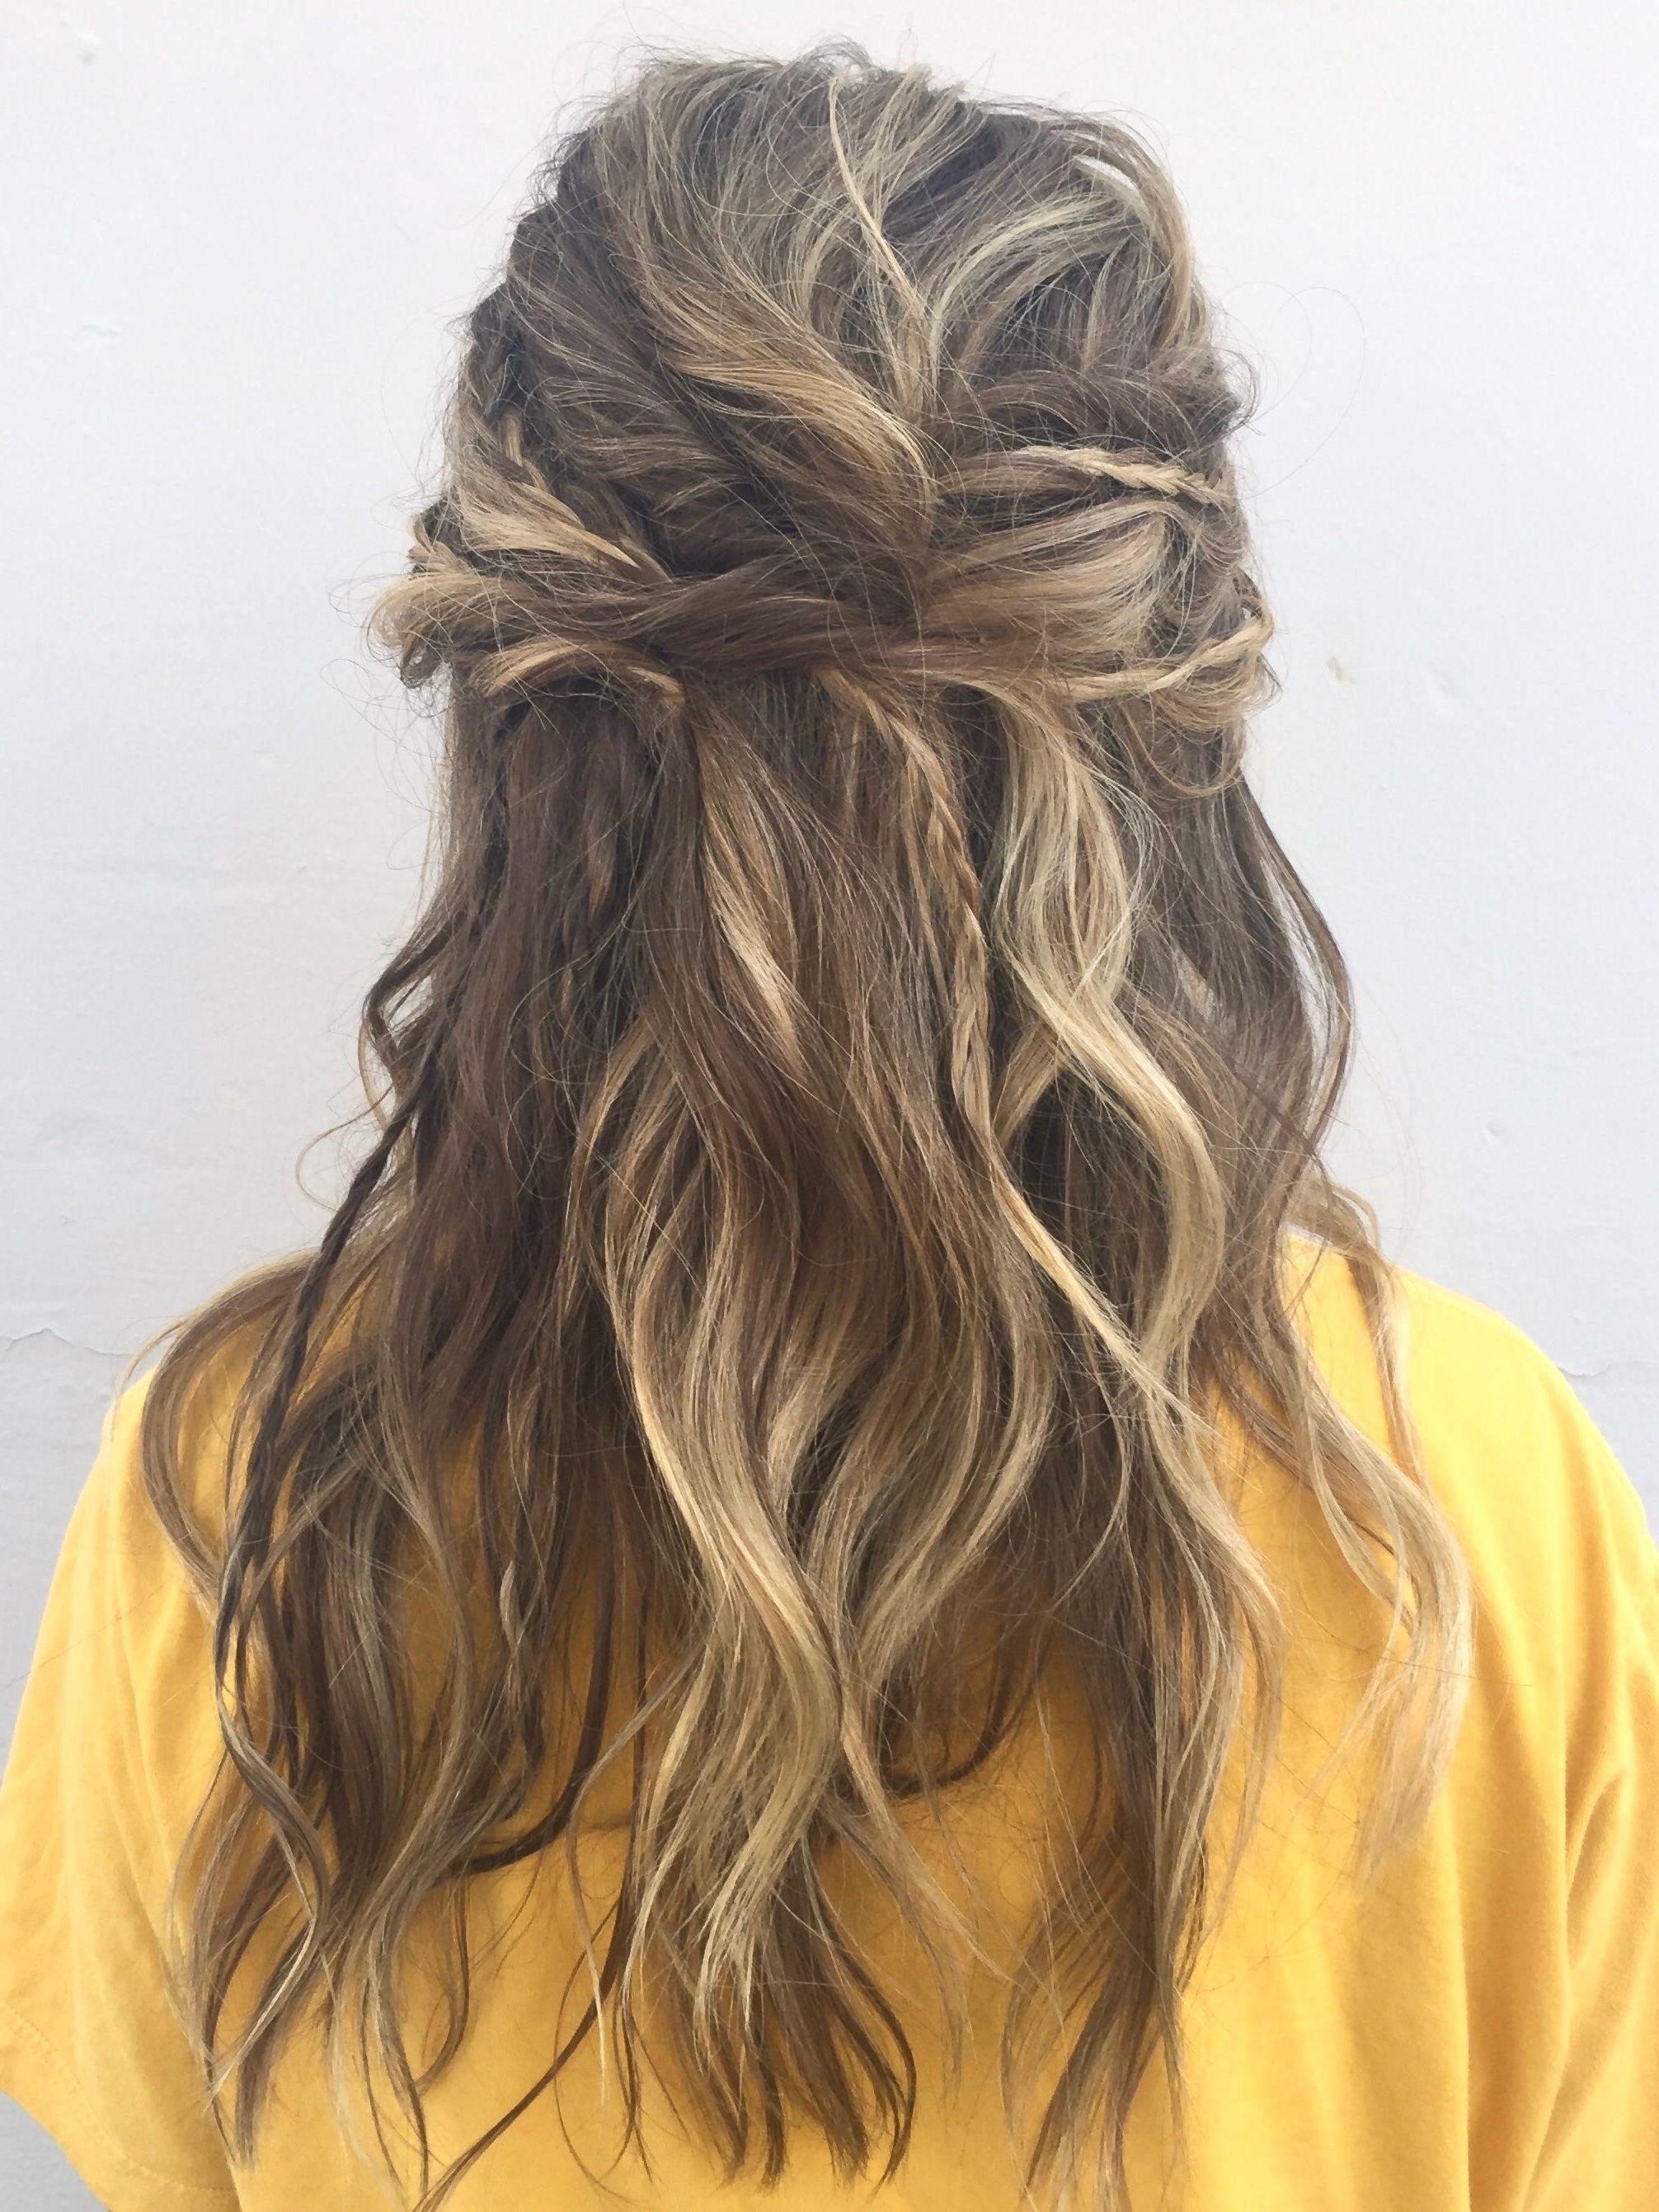 Preferred Romantically Messy Ponytail Hairstyles In Boho Hair Prom Updo With Braids And Twists And Messy Waves Half Up (View 1 of 20)